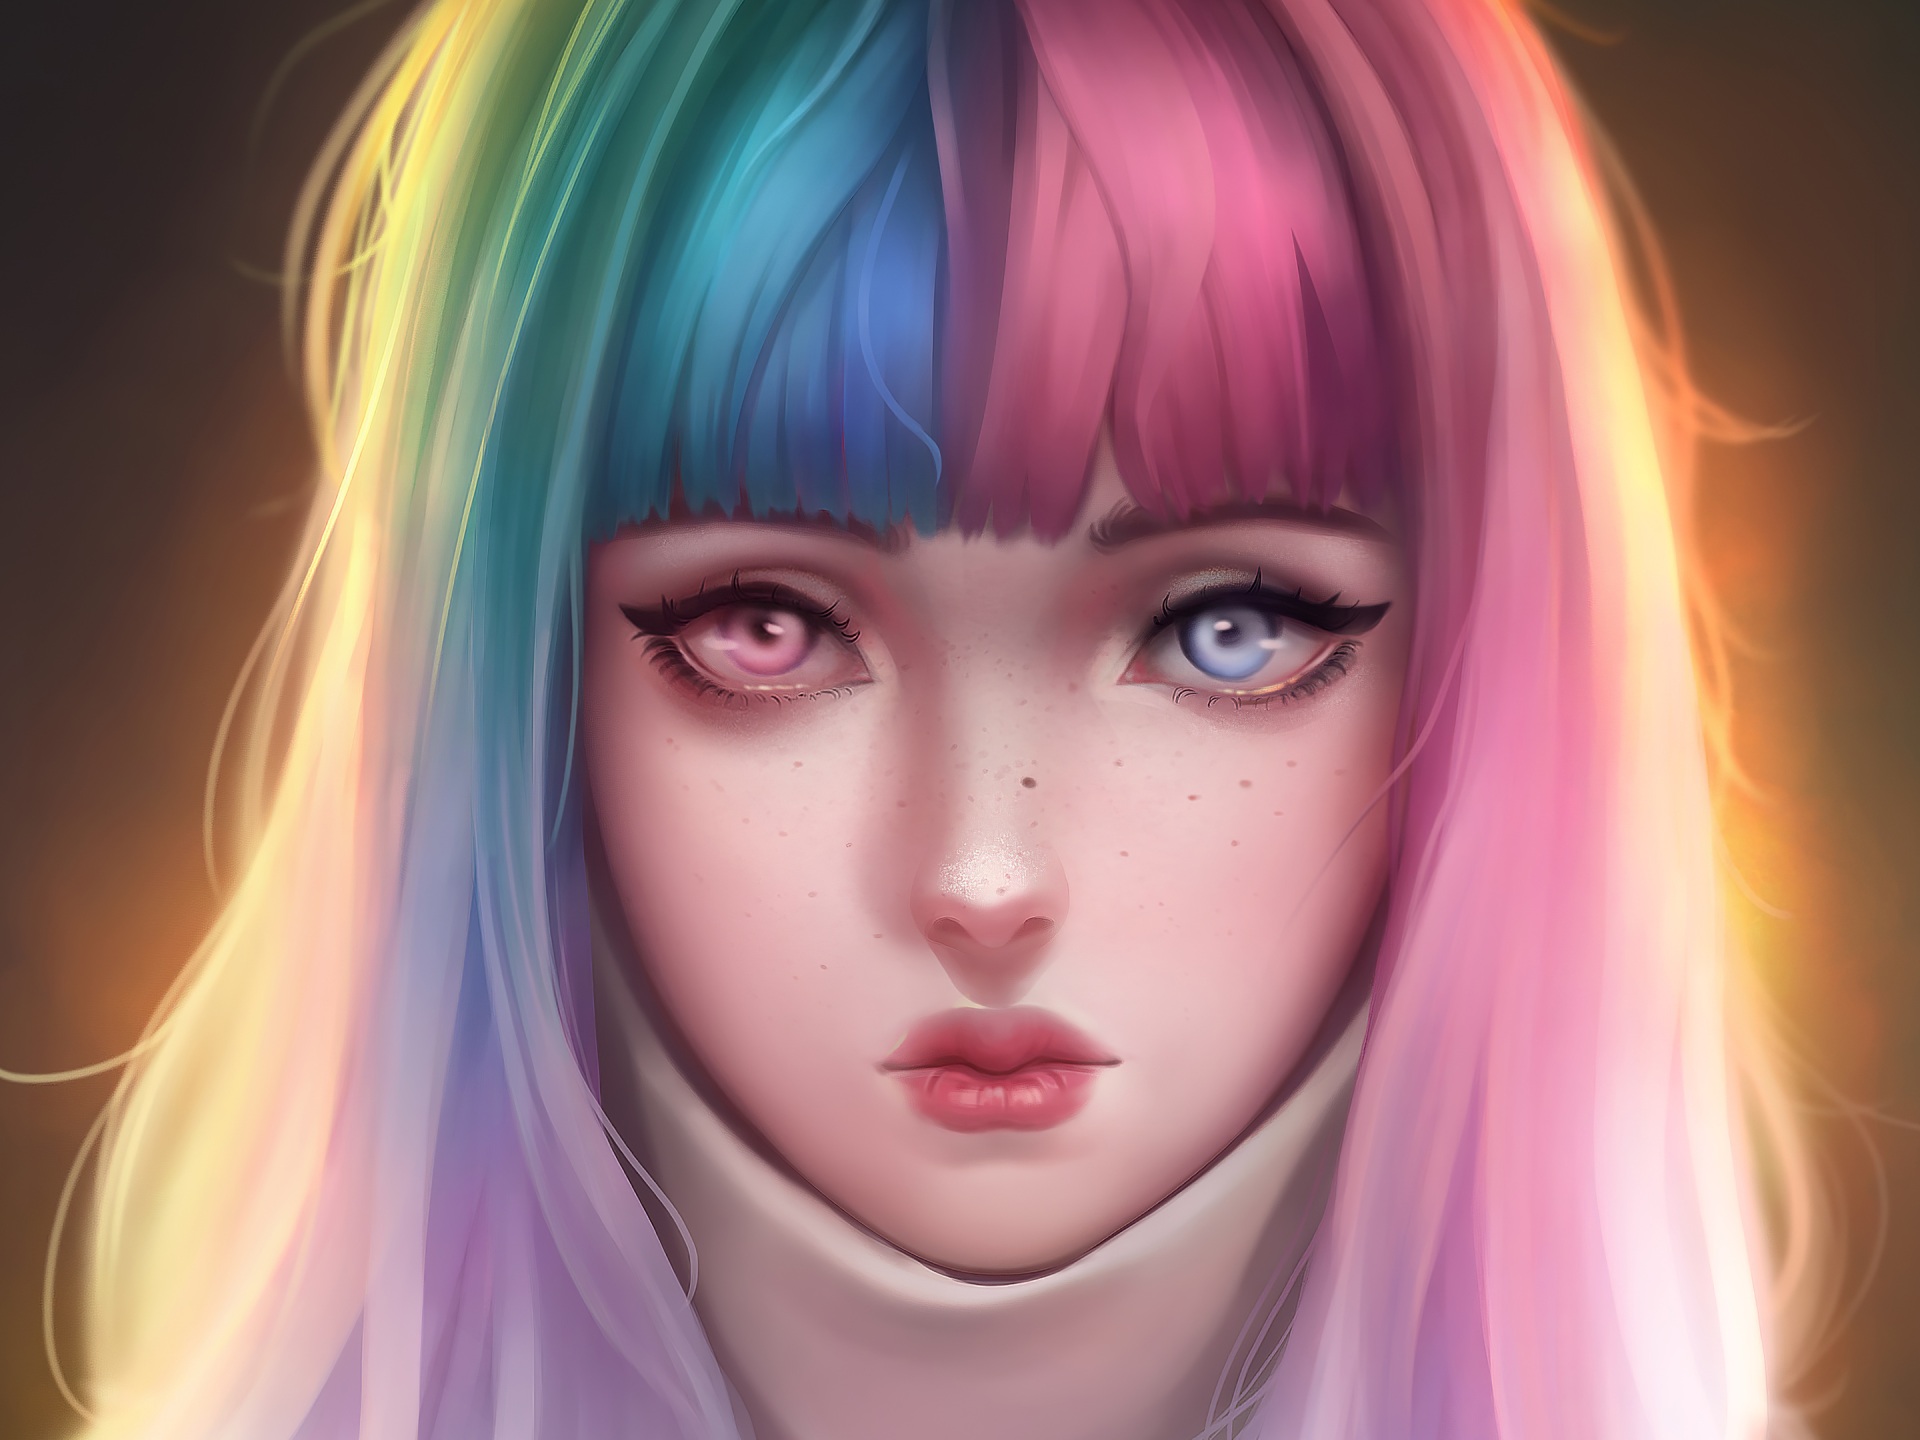 Anime Girl Colorful Hairs - 4k Wallpapers - 40.000+ ipad wallpapers 4k ...